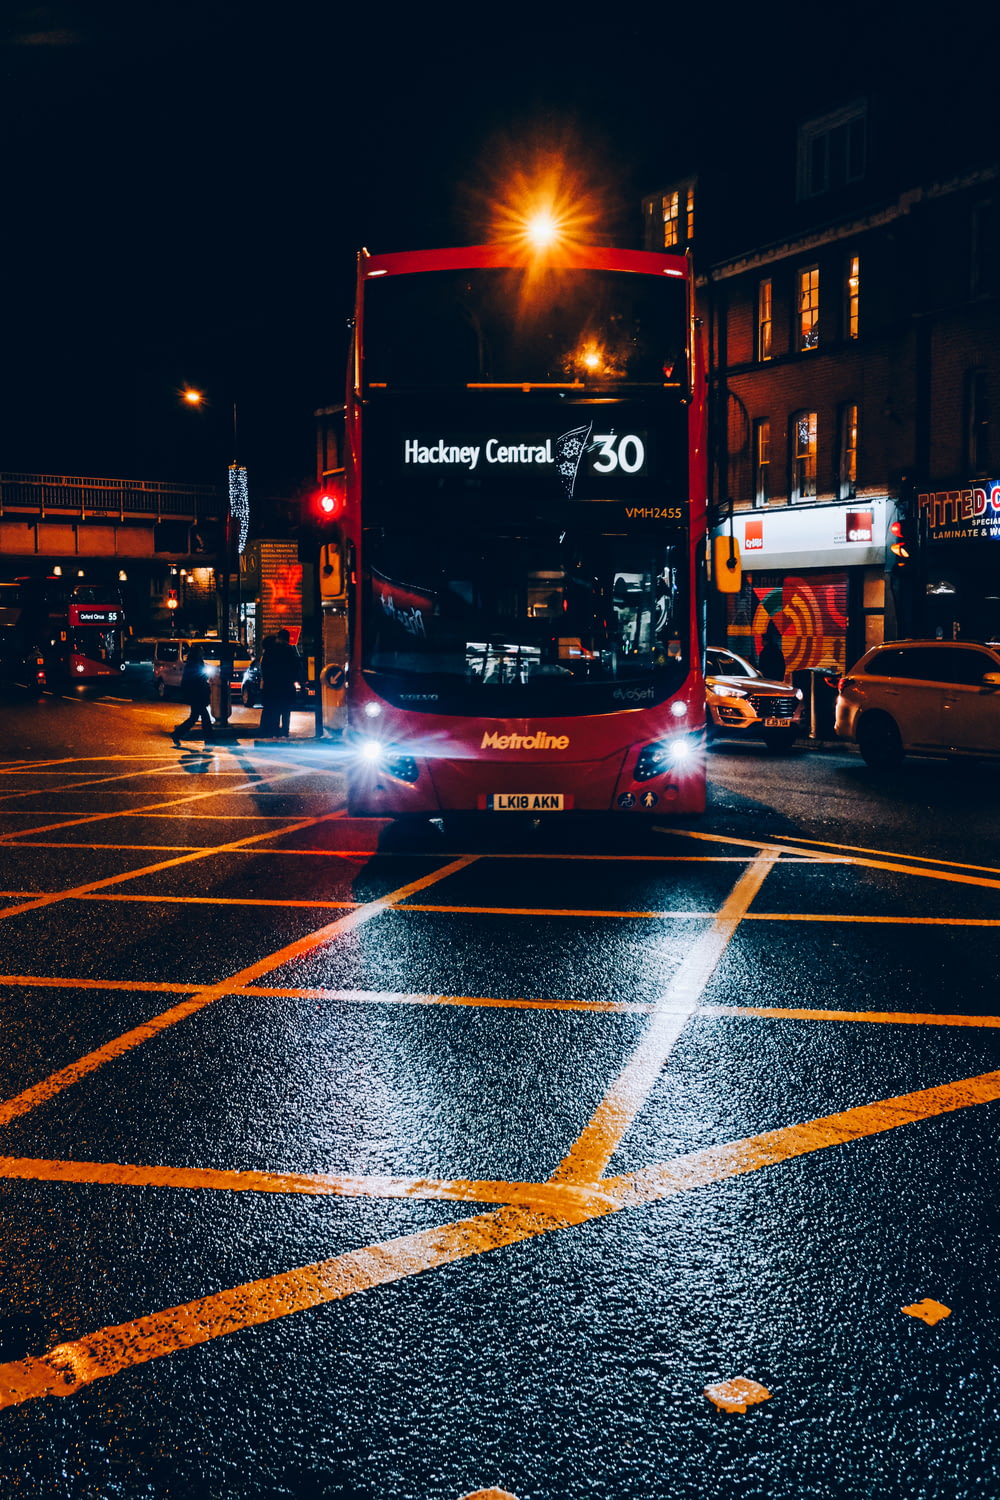 red and black double decker bus on road during night time